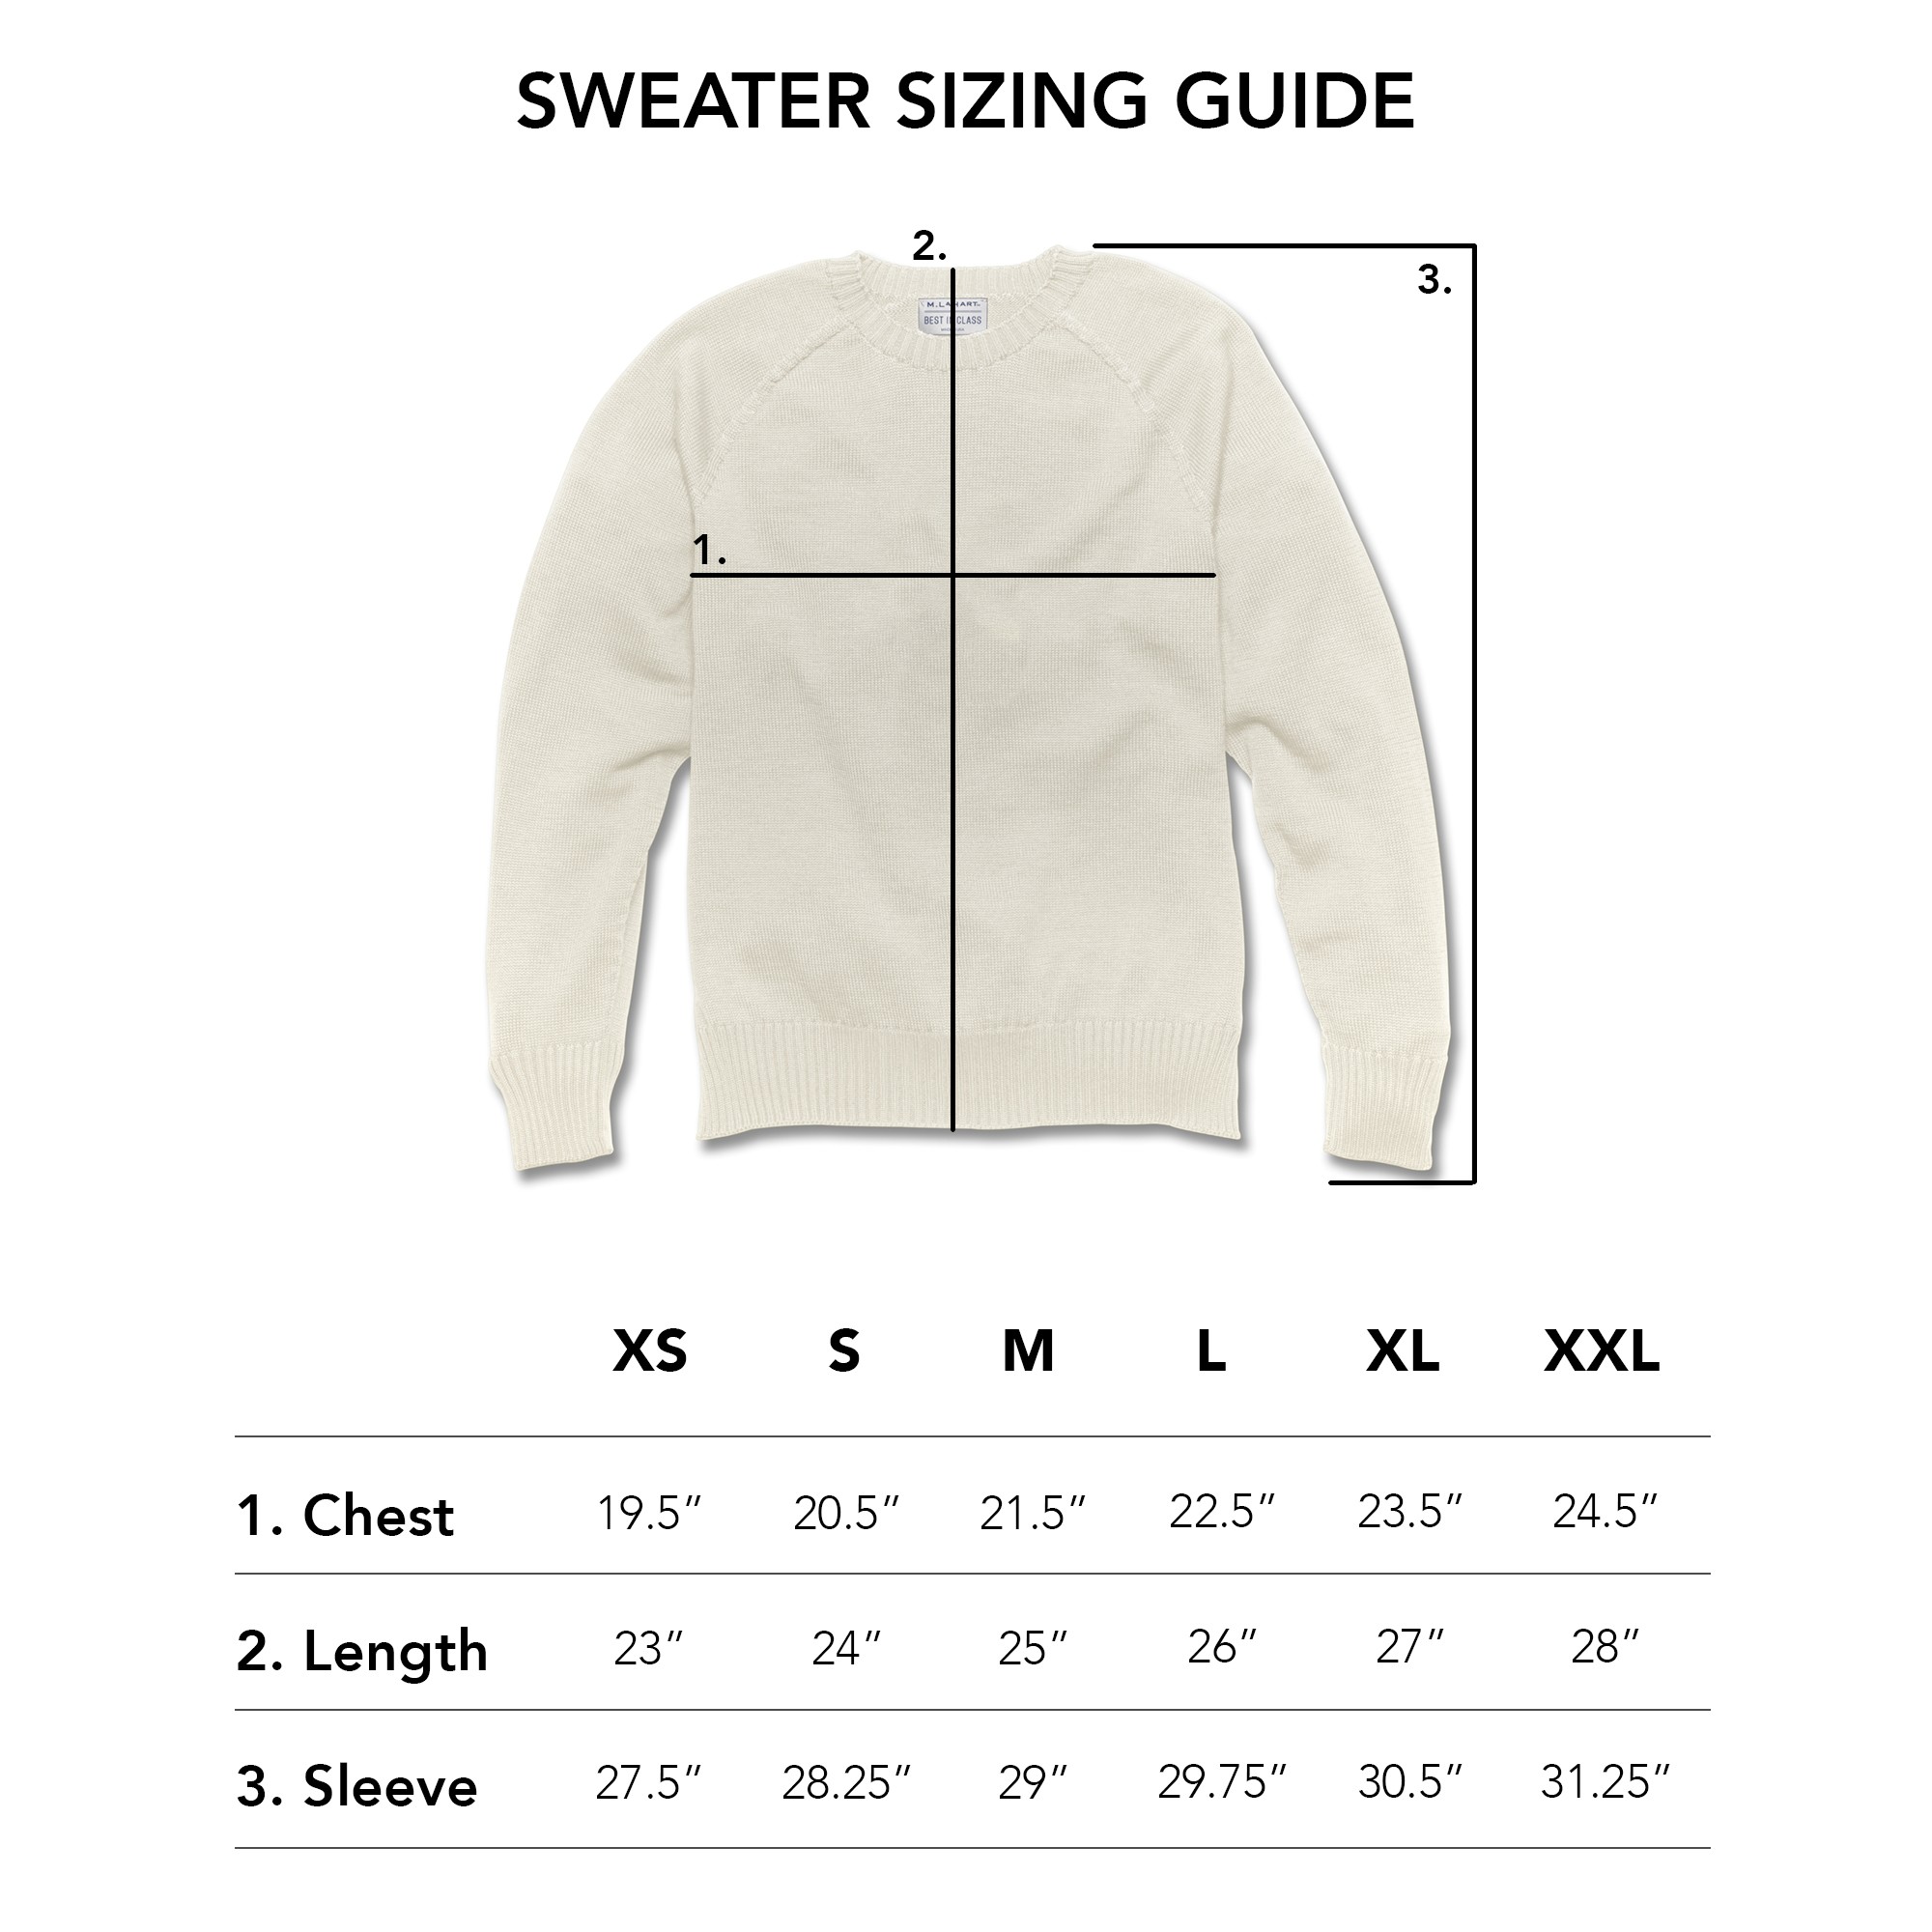 Sweater Sizing Guide